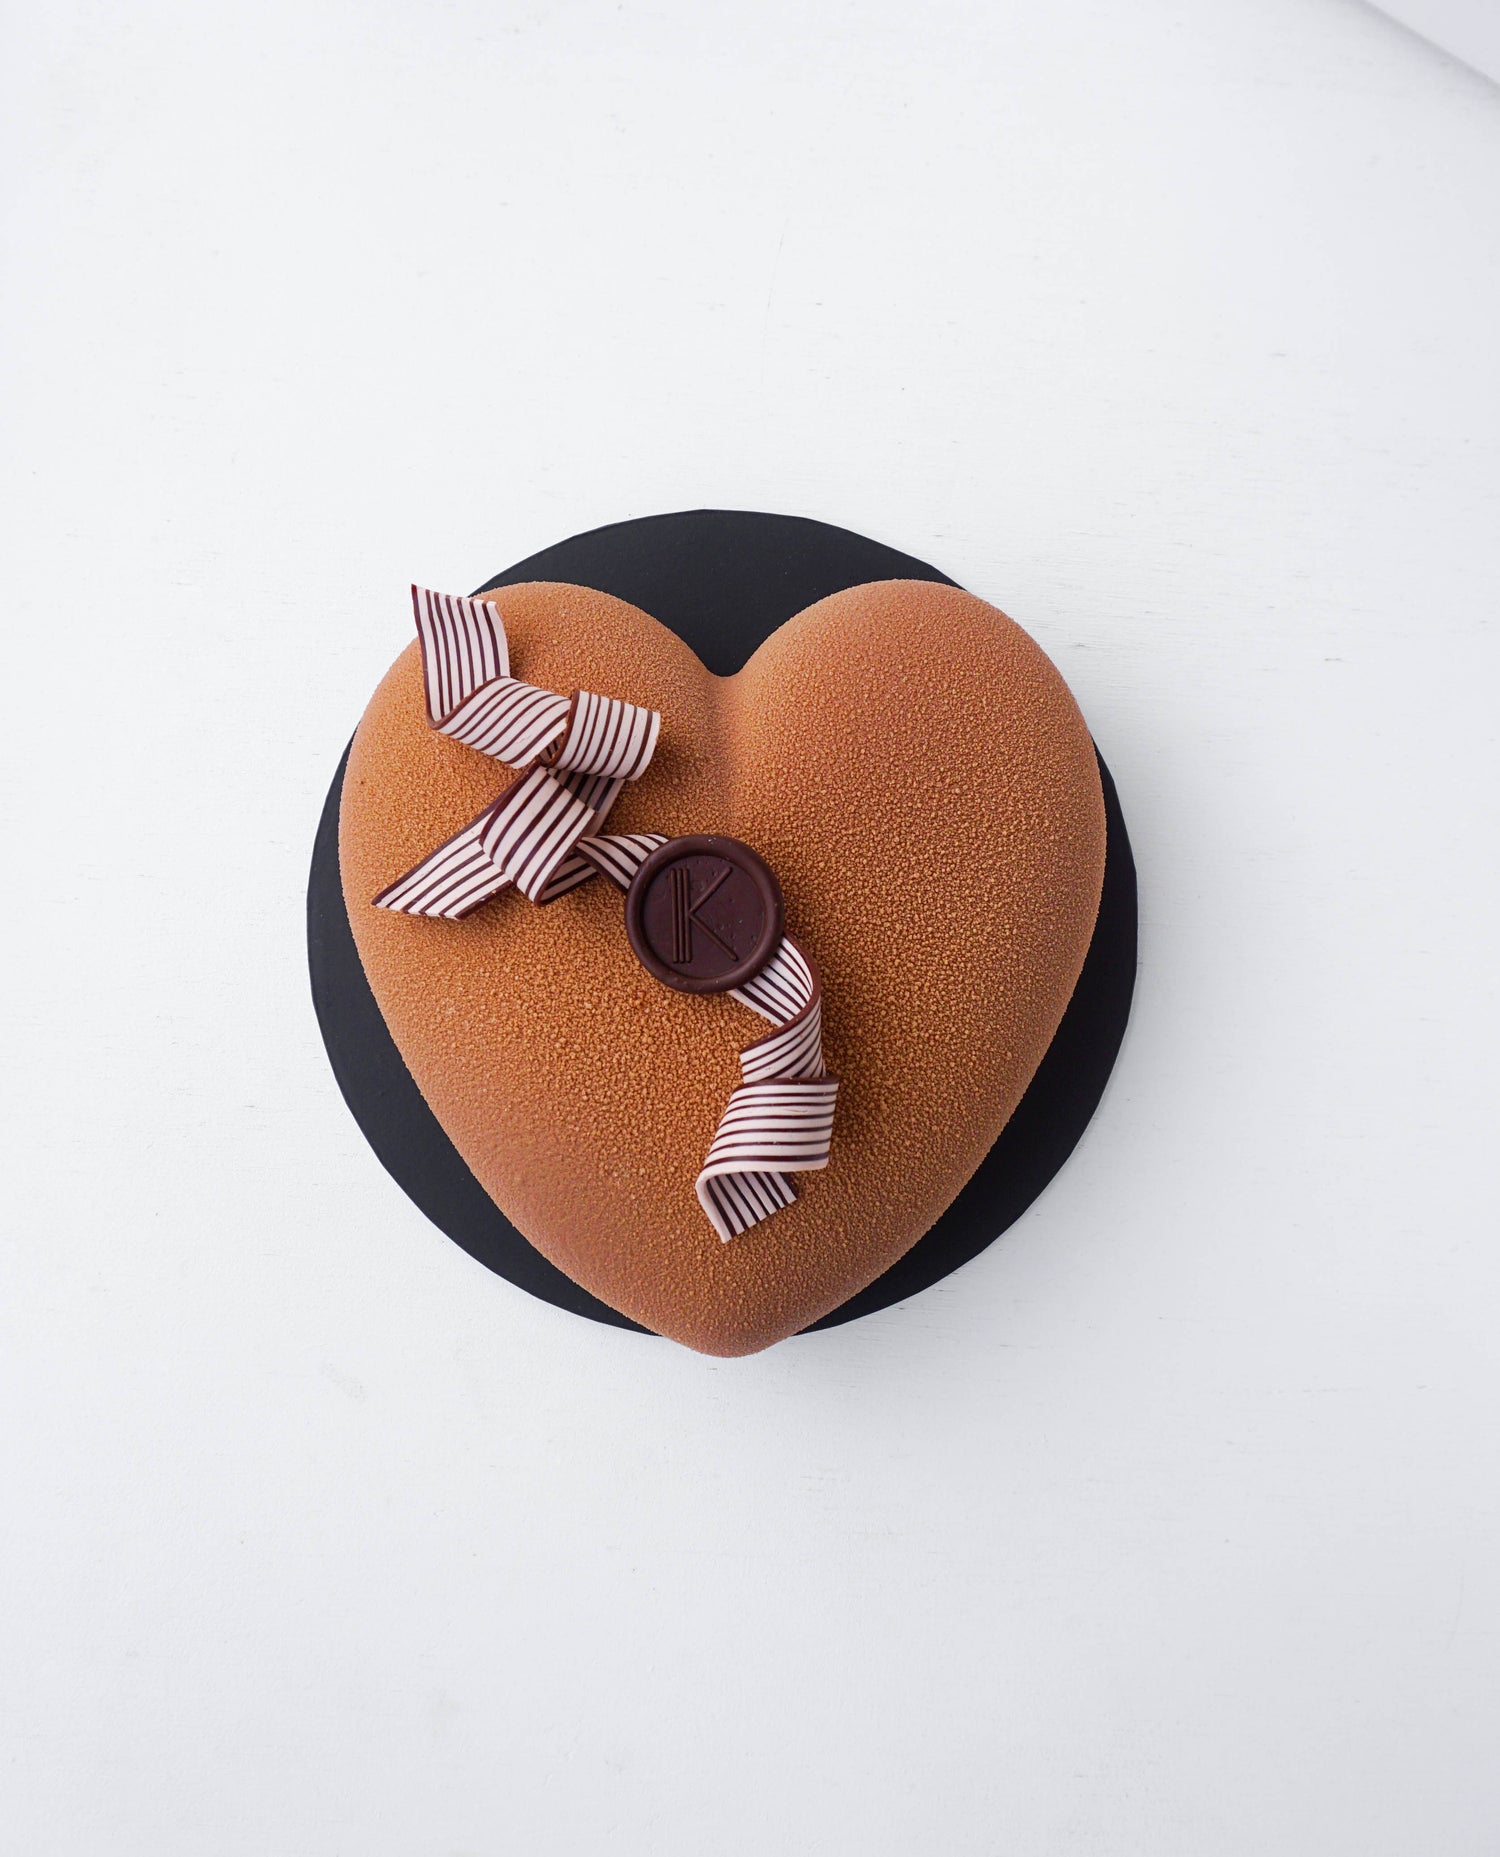 MOUSSE HEART CAKE